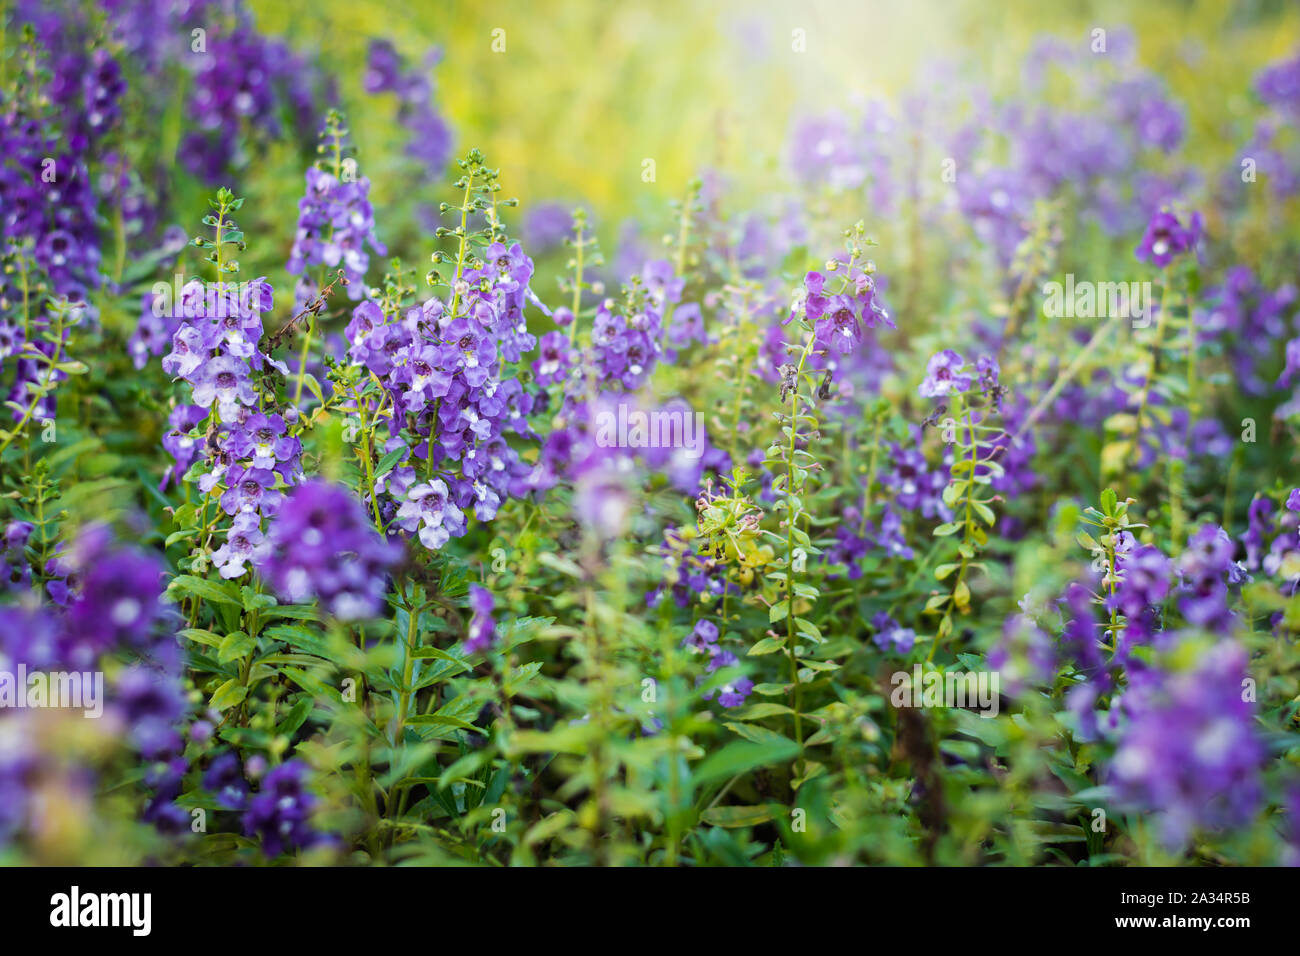 Angelonia goyazensis Benth flower in the meadow under sunlight Stock Photo